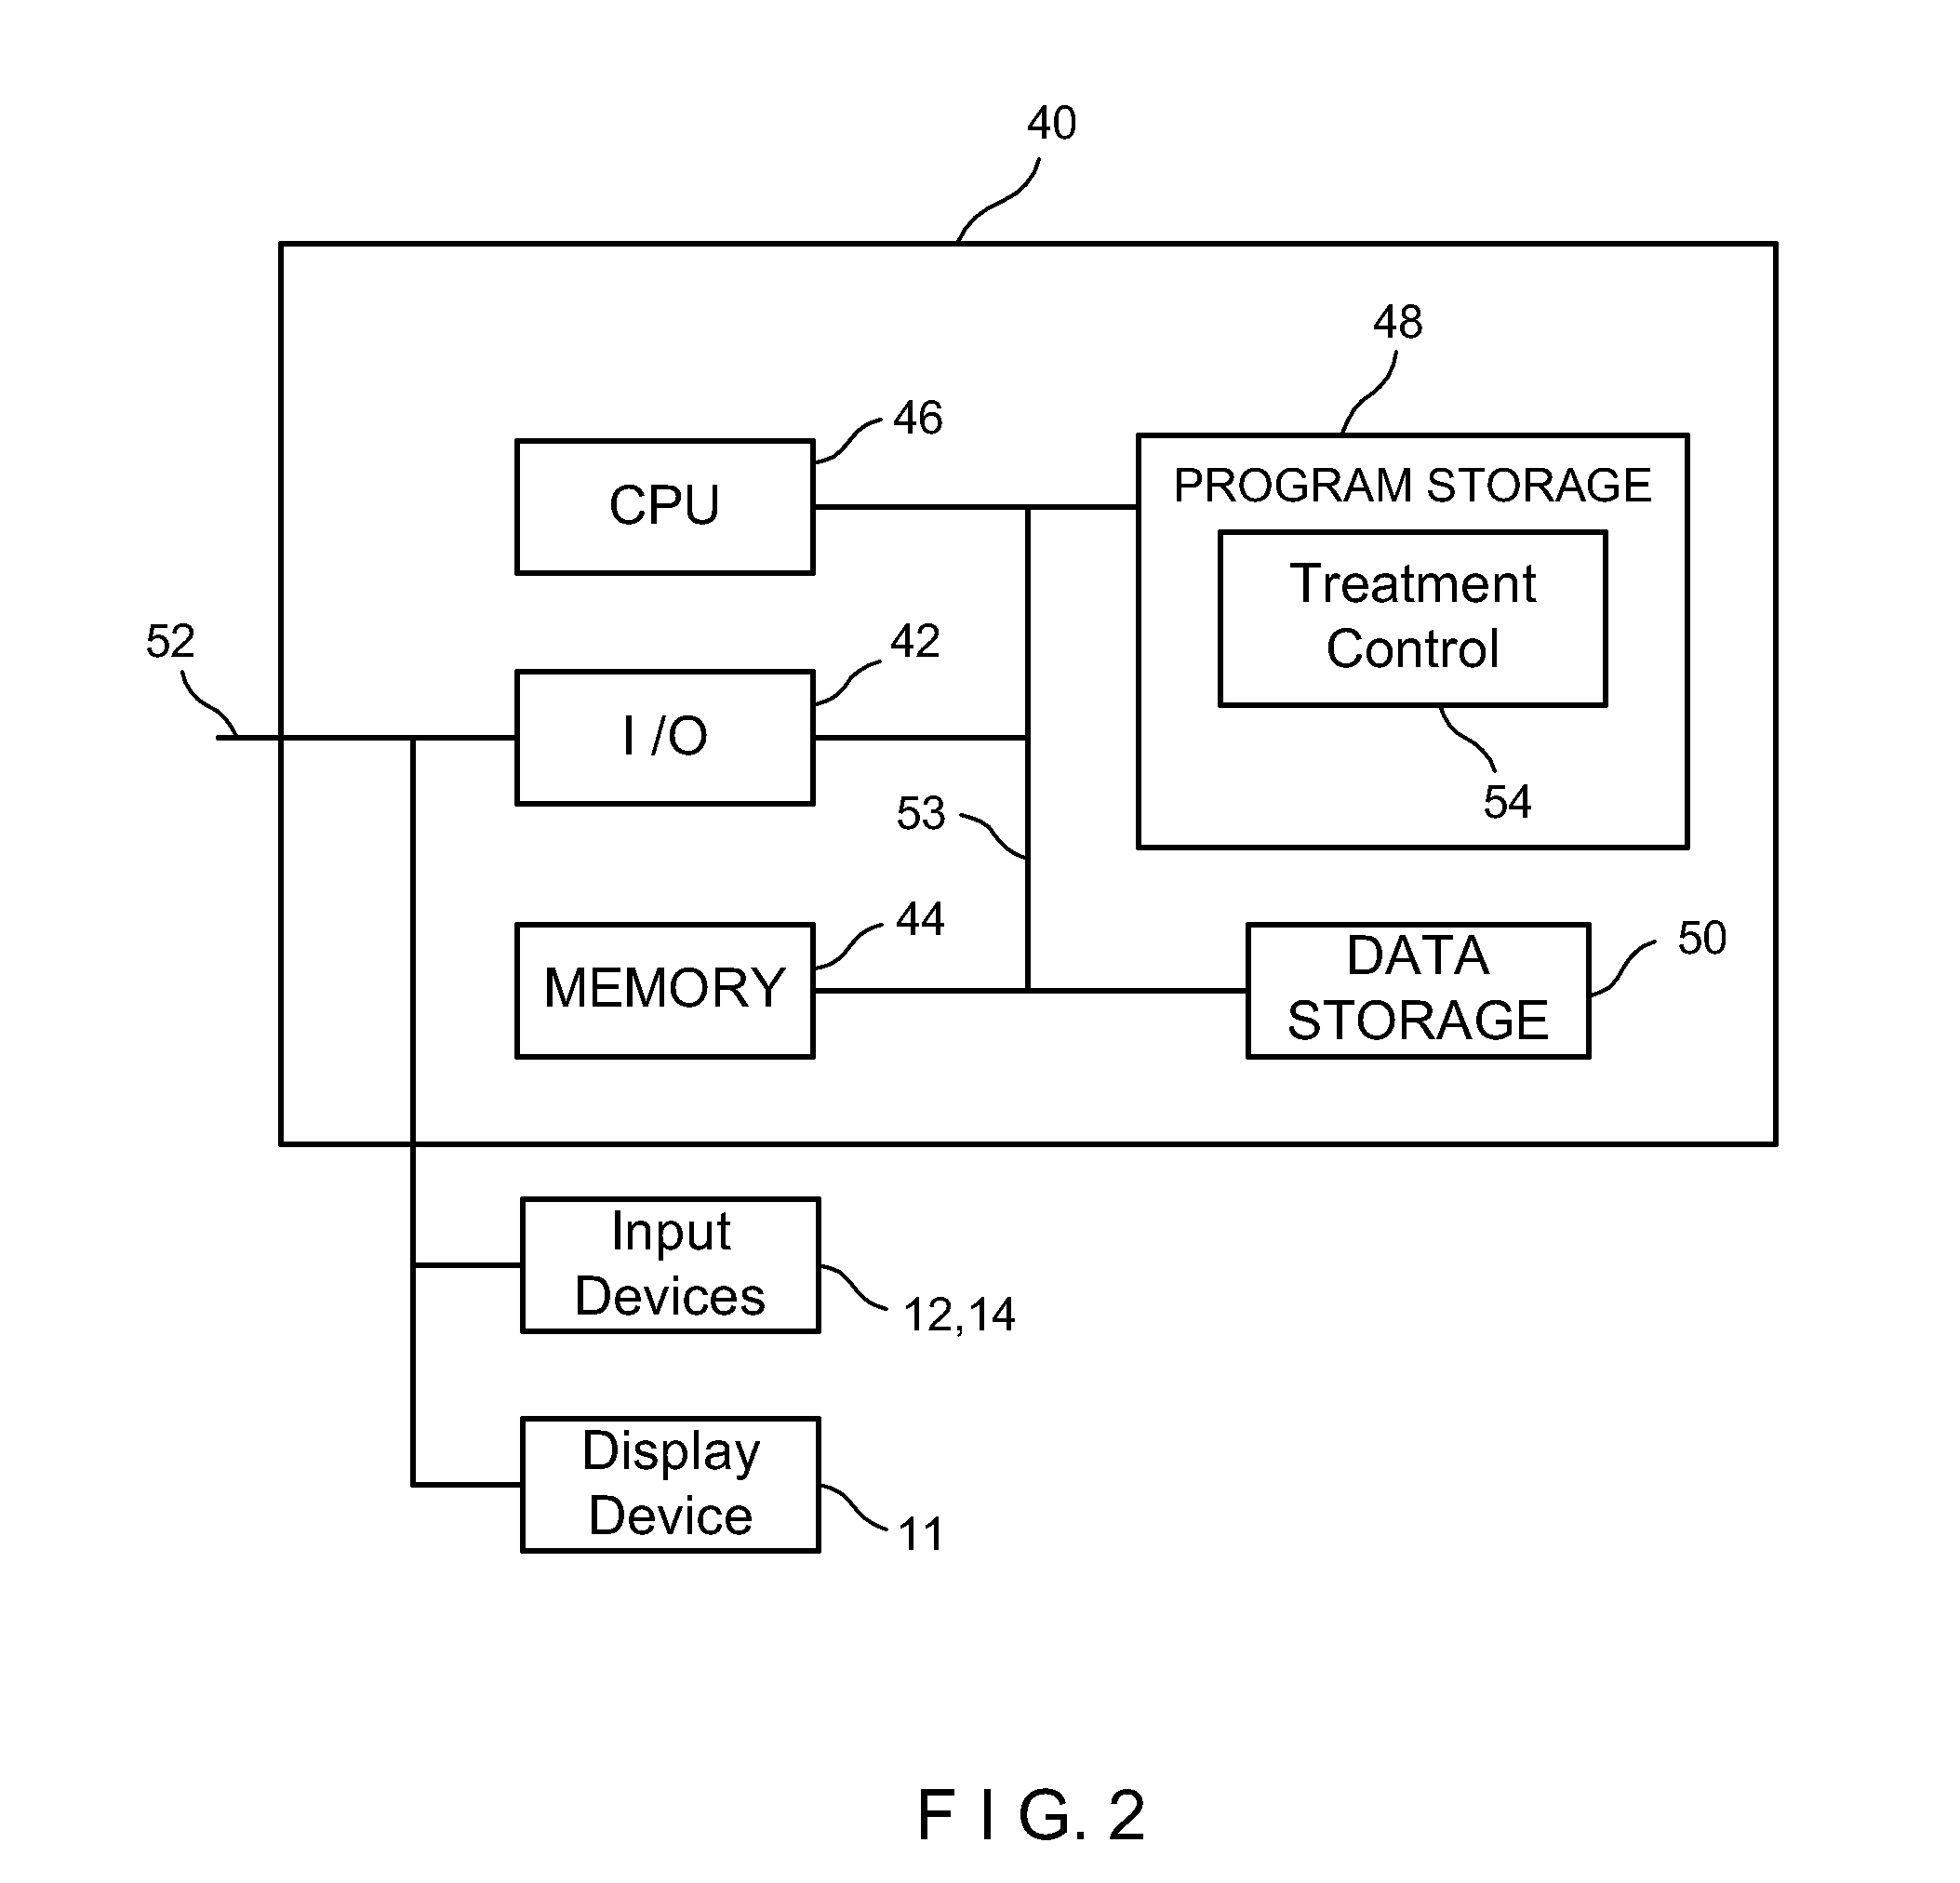 System and Method for Ablating a Tissue Site by Electroporation with Real-Time monitoring of Treatment Progress